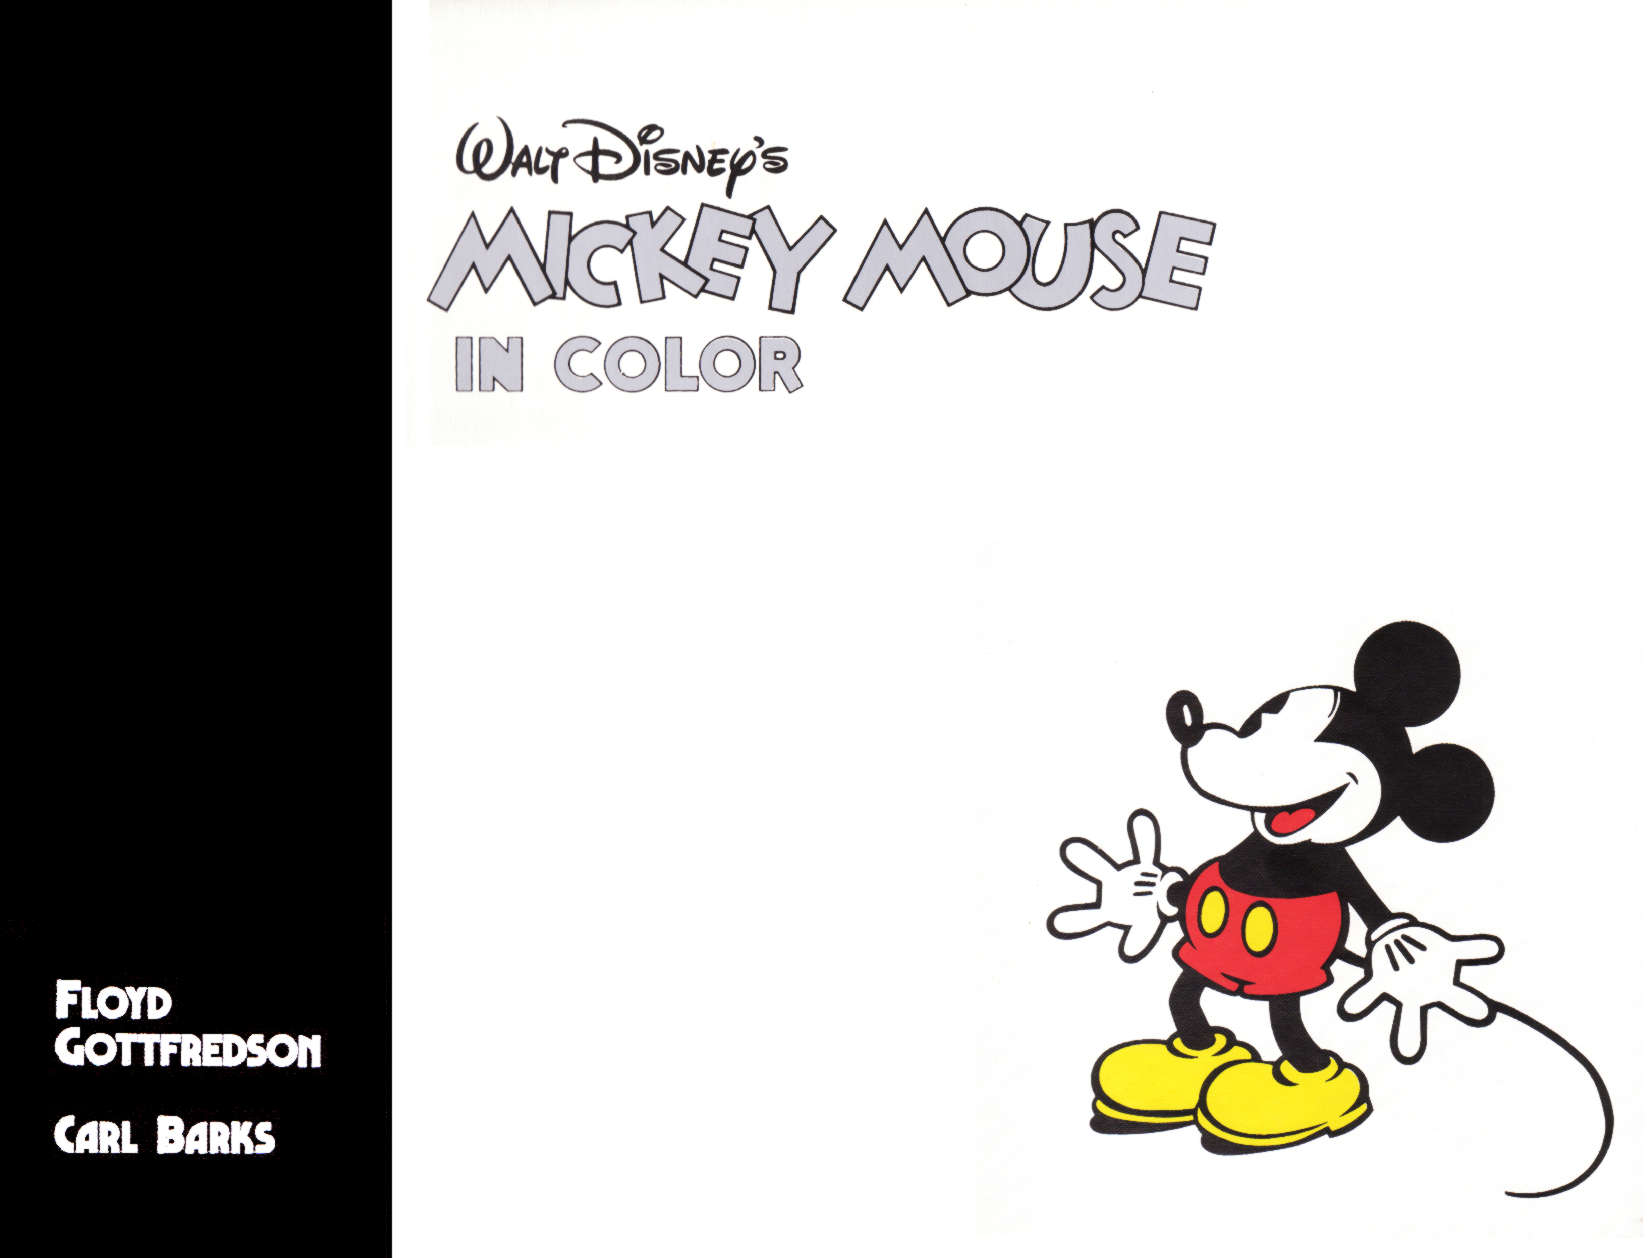 Mickey Mouse in Color.jpg